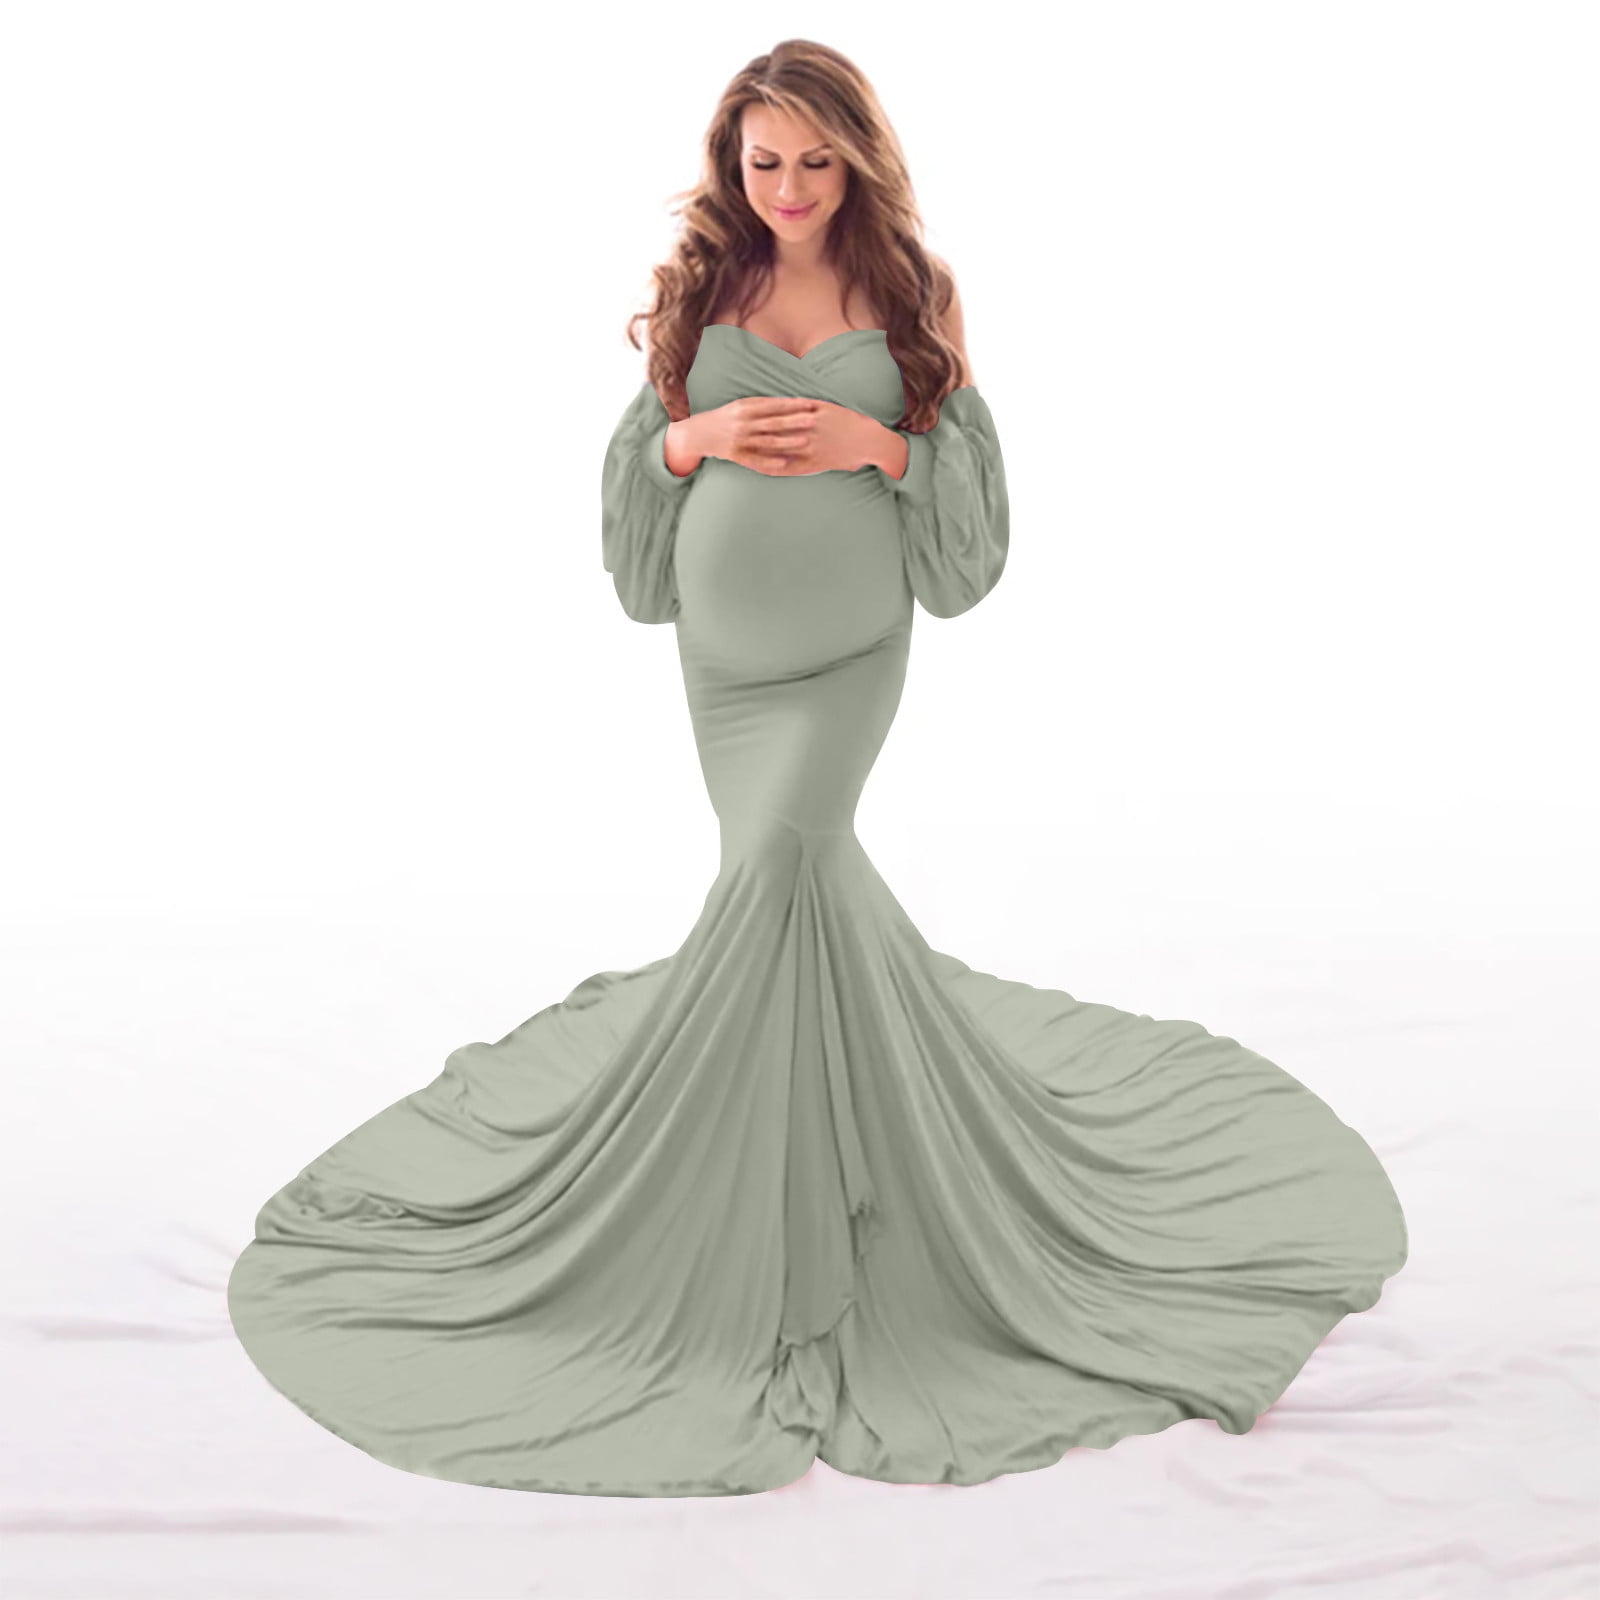 Borniu Dress For Photoshoot Women Pregnants Sexy Photography Props Off  Shoulder Long Dress Clearance